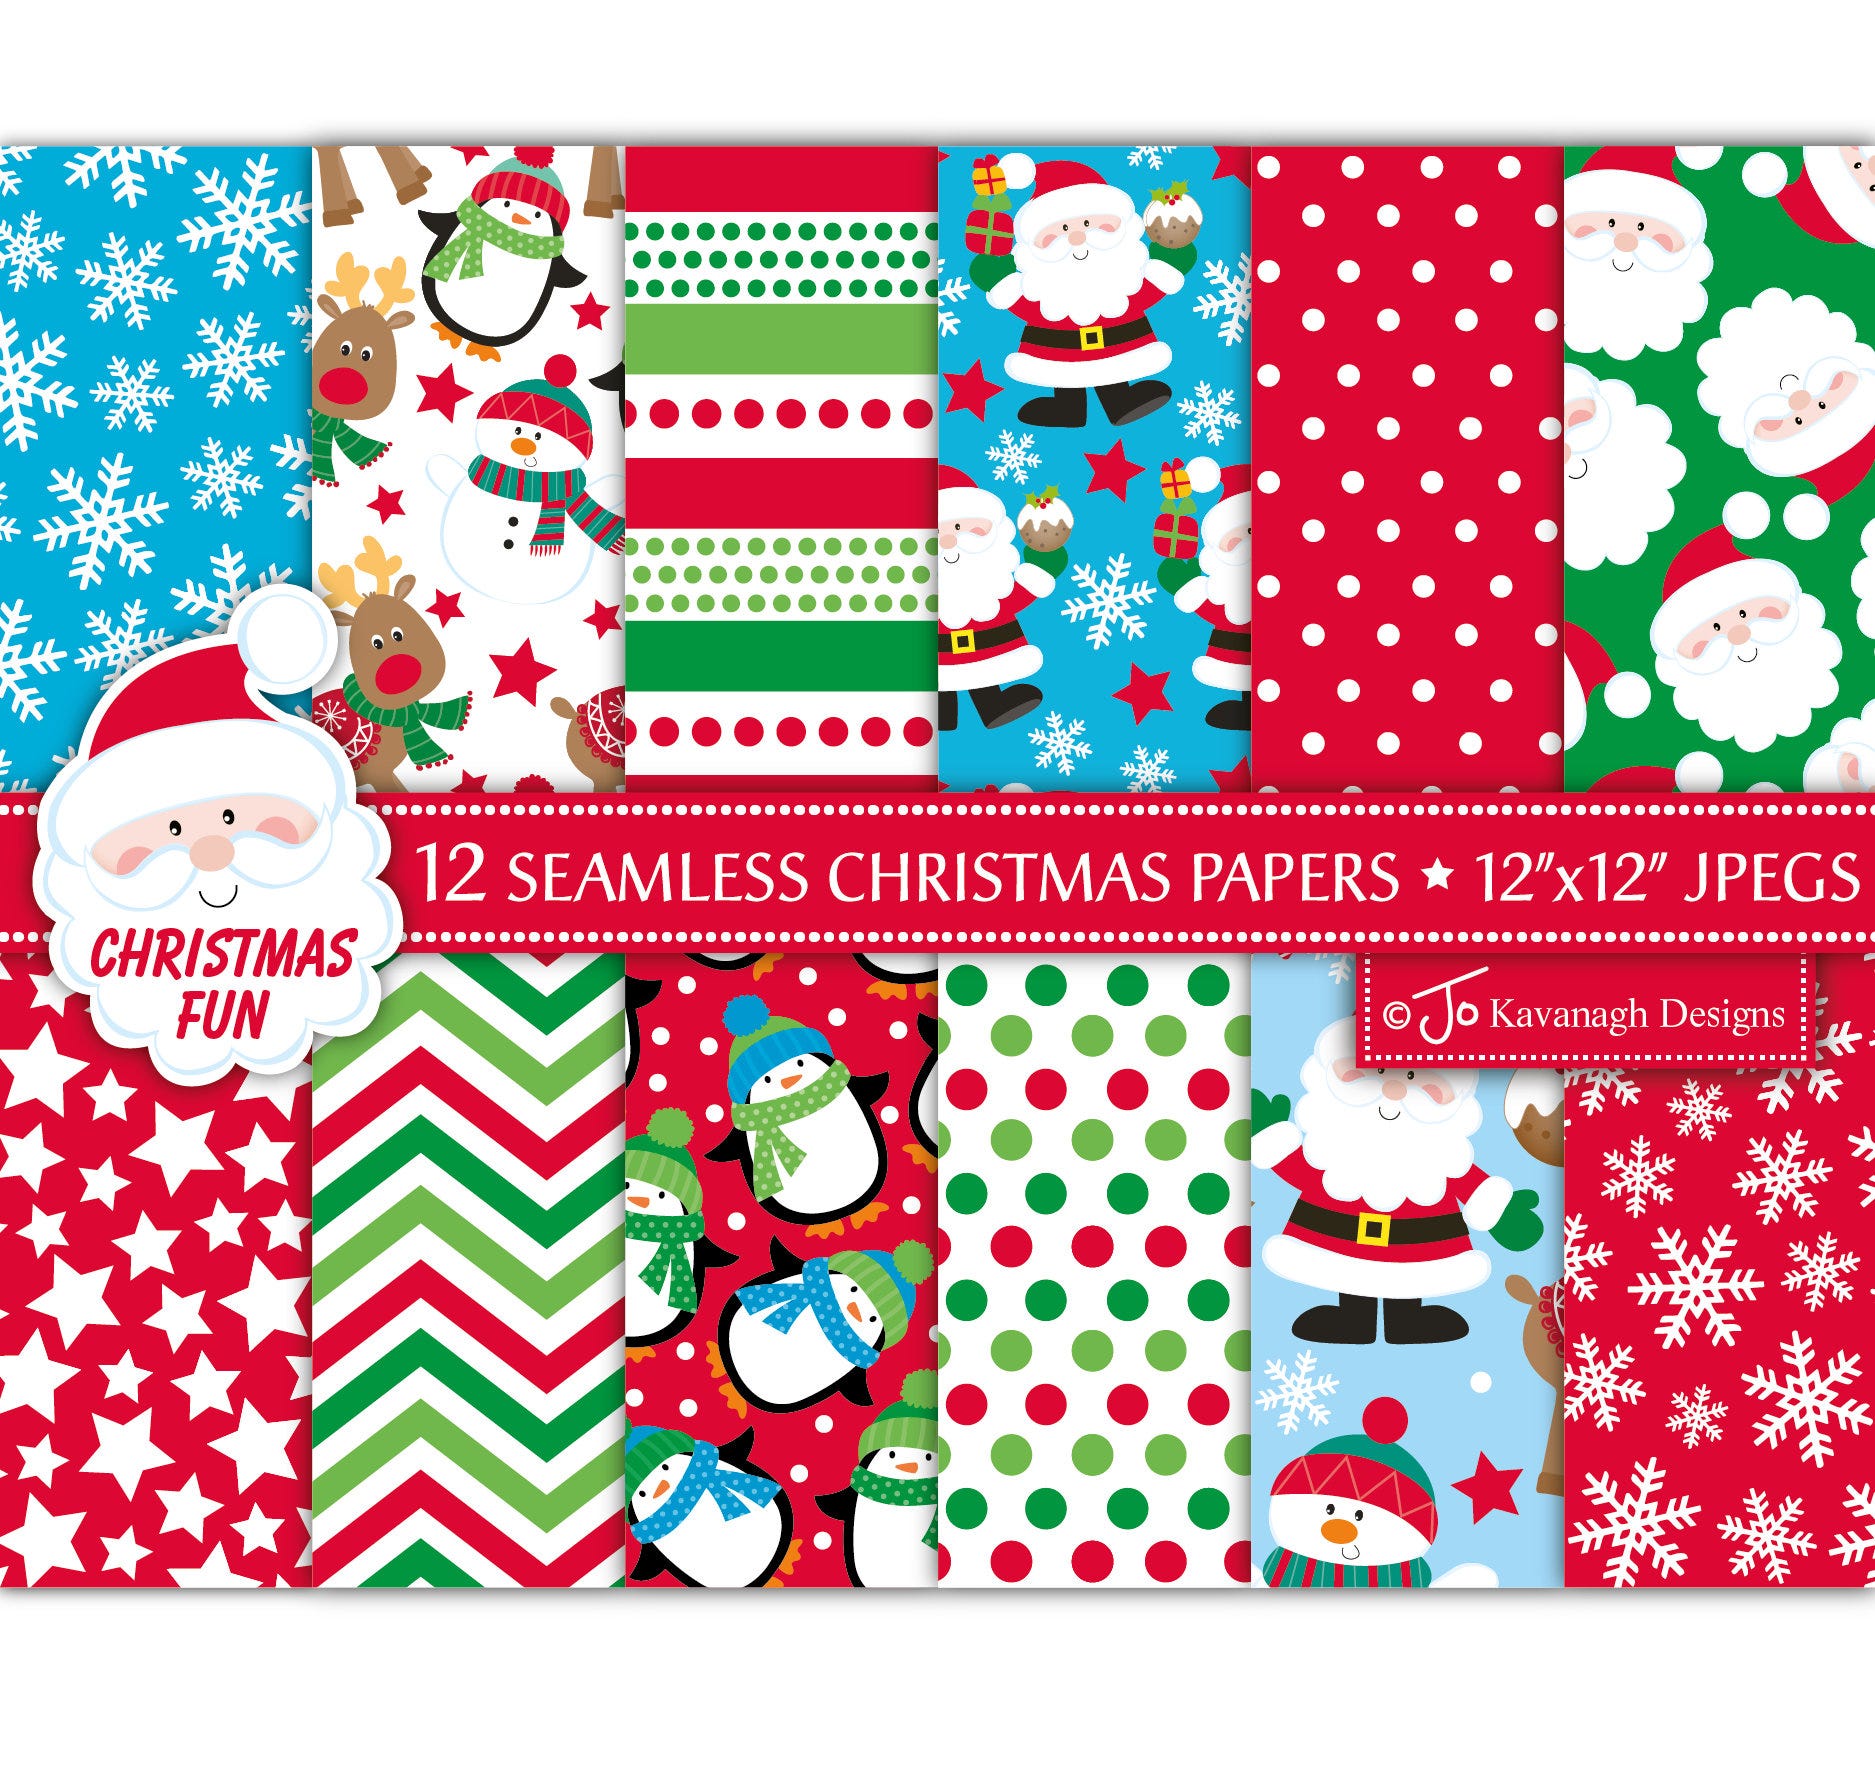 Christmas Digital Papers,Christmas Scrapbook Papers,Santa Paper,Reindeer Papers,Holiday Papers,Christmas Backgrounds,Commercial Use (P5)